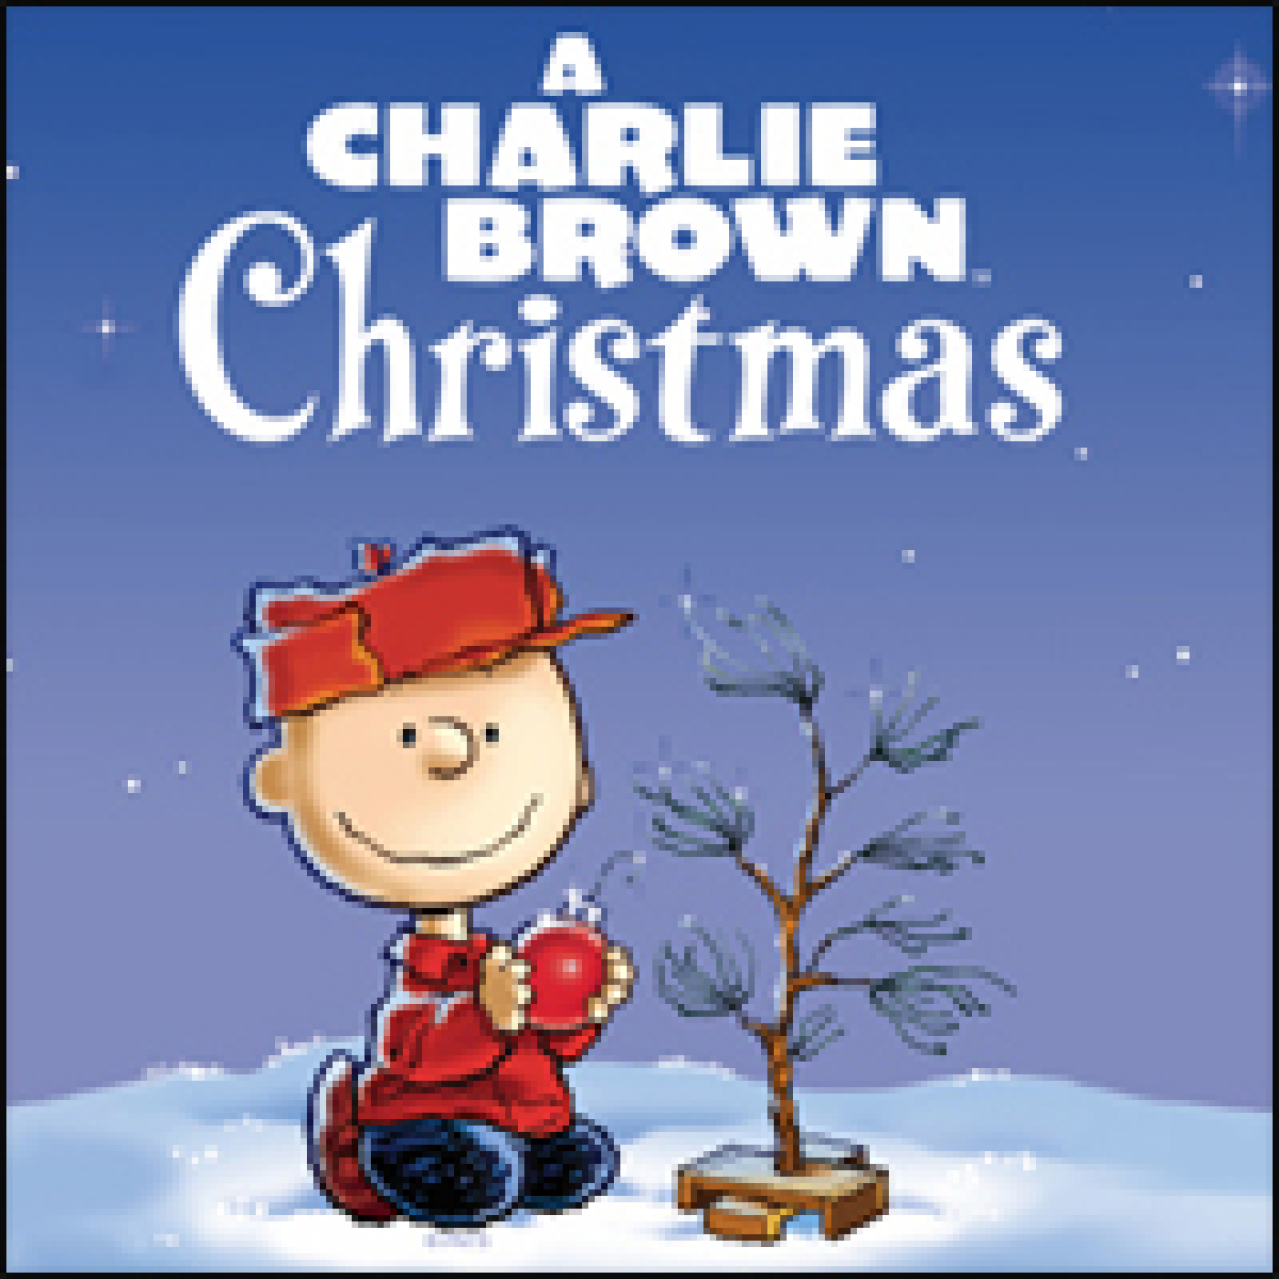 a charlie brown christmas logo Broadway shows and tickets